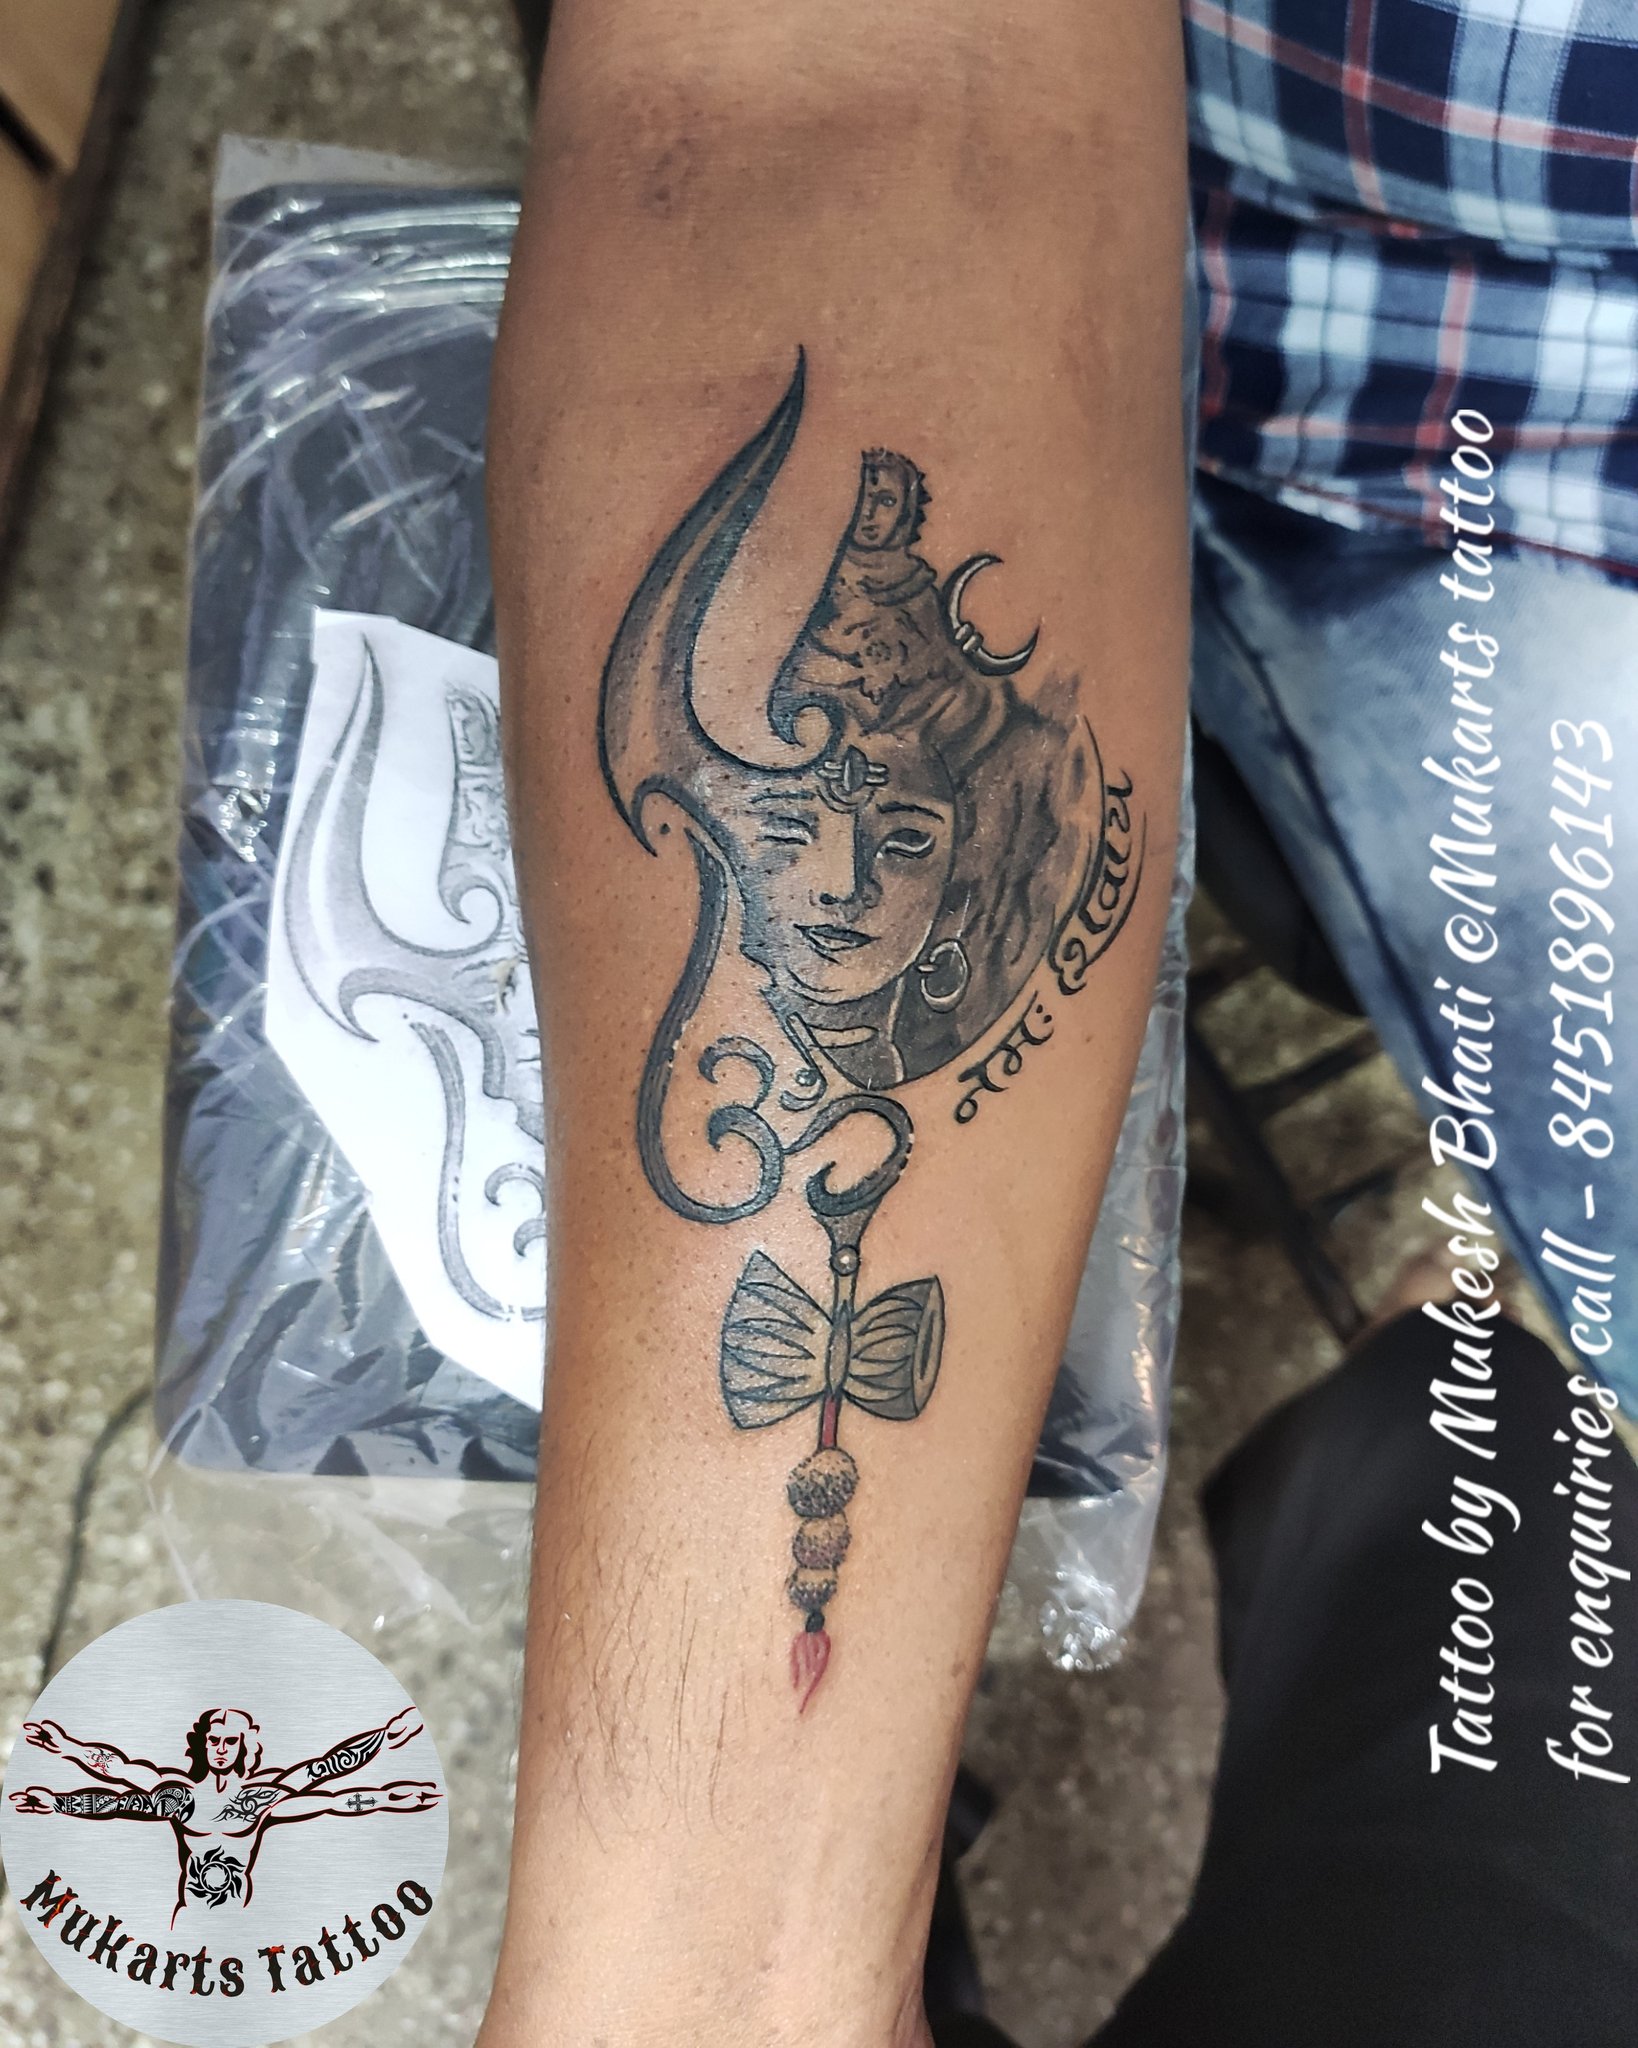 Crazy ink tattoo  Body piercing on Twitter lord Shiva is the most  powerful god of the hindu pantheon Shiva hasFor more info  visithttpstcoWwJT6zCrmw httpstcoEXuqpRl4FU  Twitter